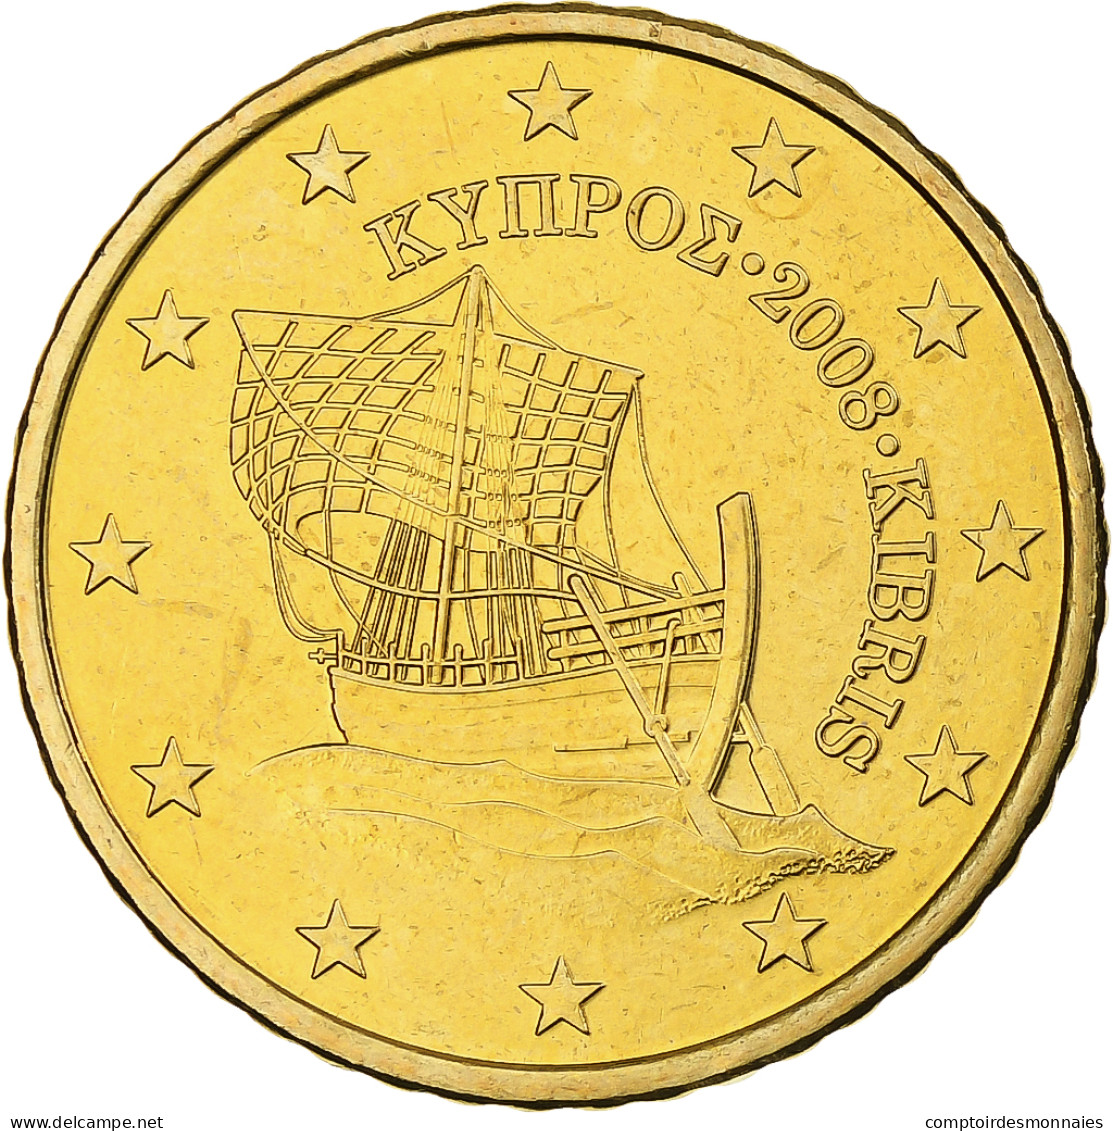 Chypre, 50 Euro Cent, 2008, BU, FDC, Or Nordique, KM:83 - Cyprus